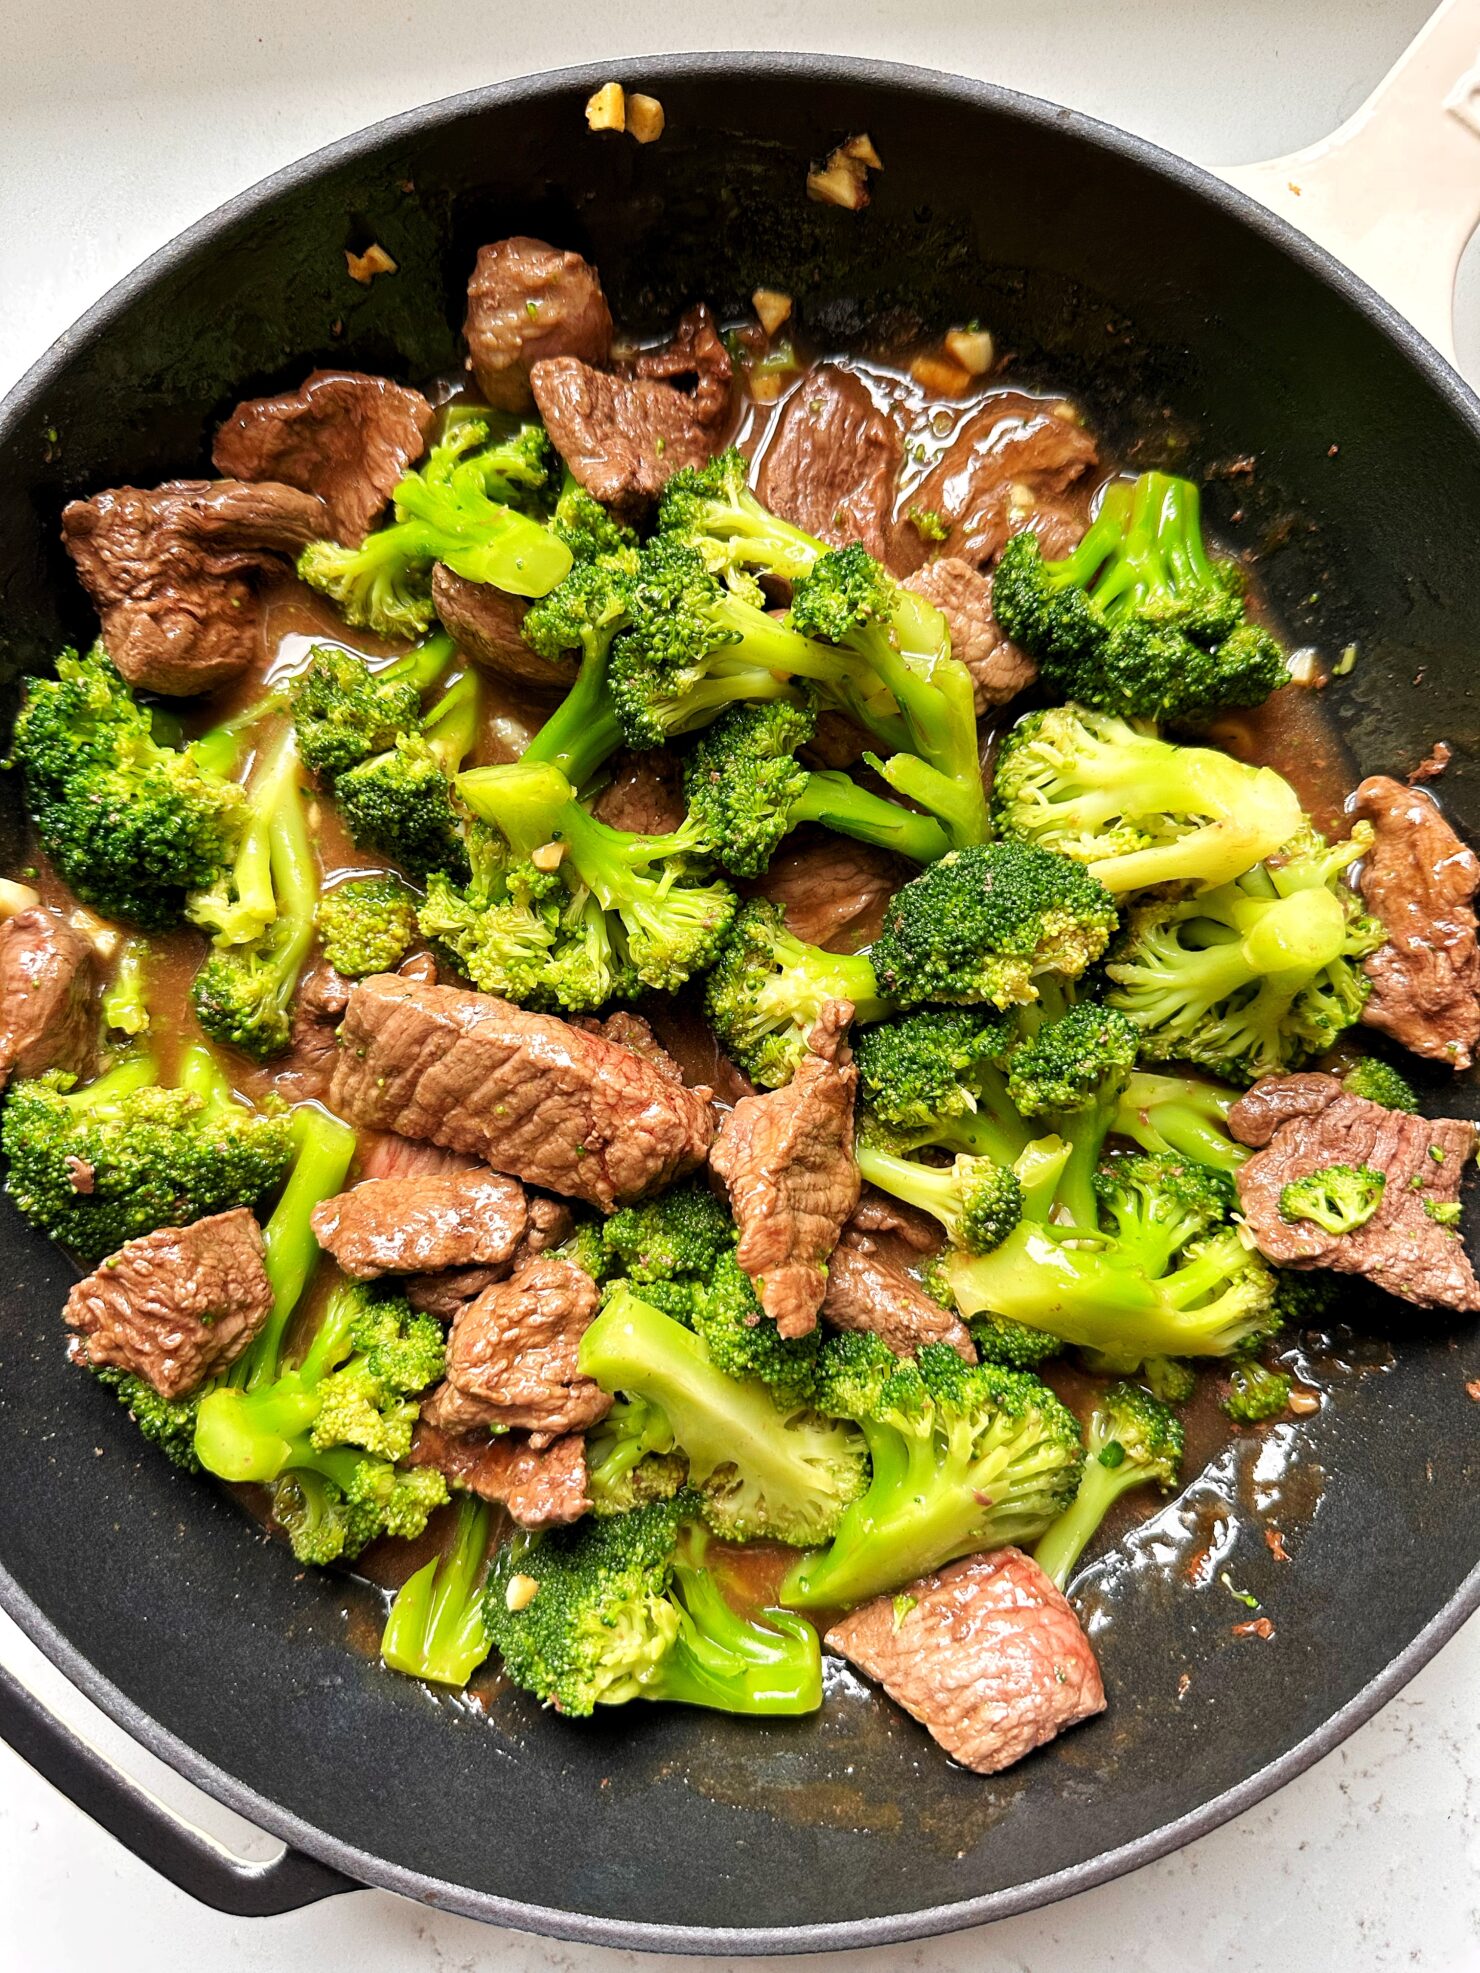 15-minute Beef and Broccoli Skillet - rachLmansfield